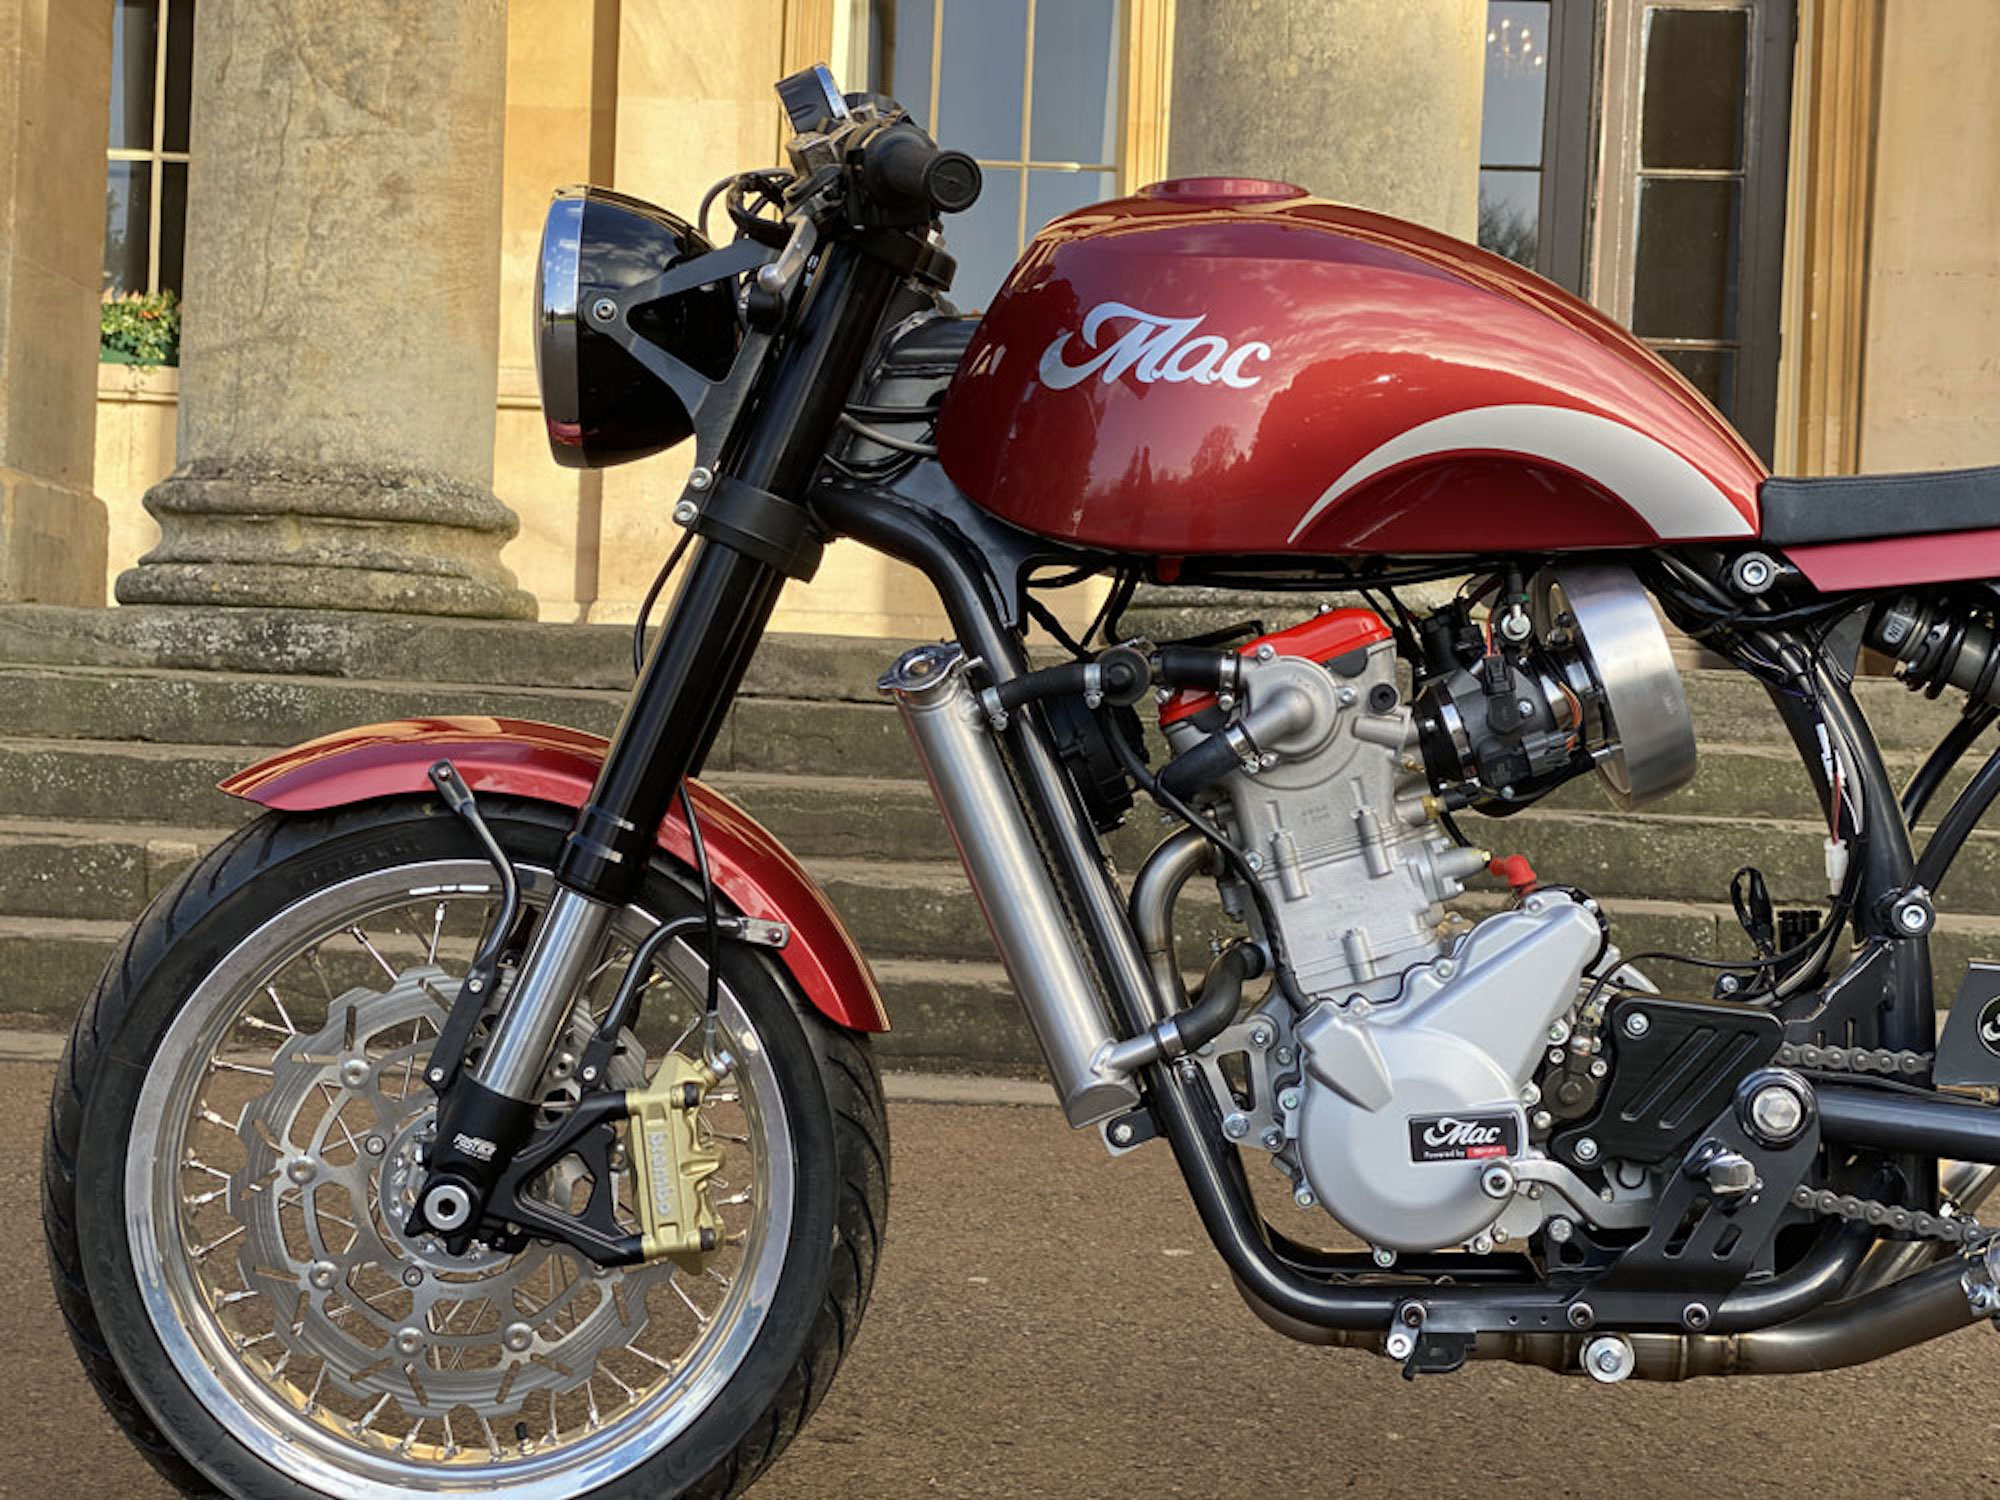 Meet 'the Ruby,' a off-roading take on a neo-retro cafe racer. Media sourced from Mac Motorcycles.